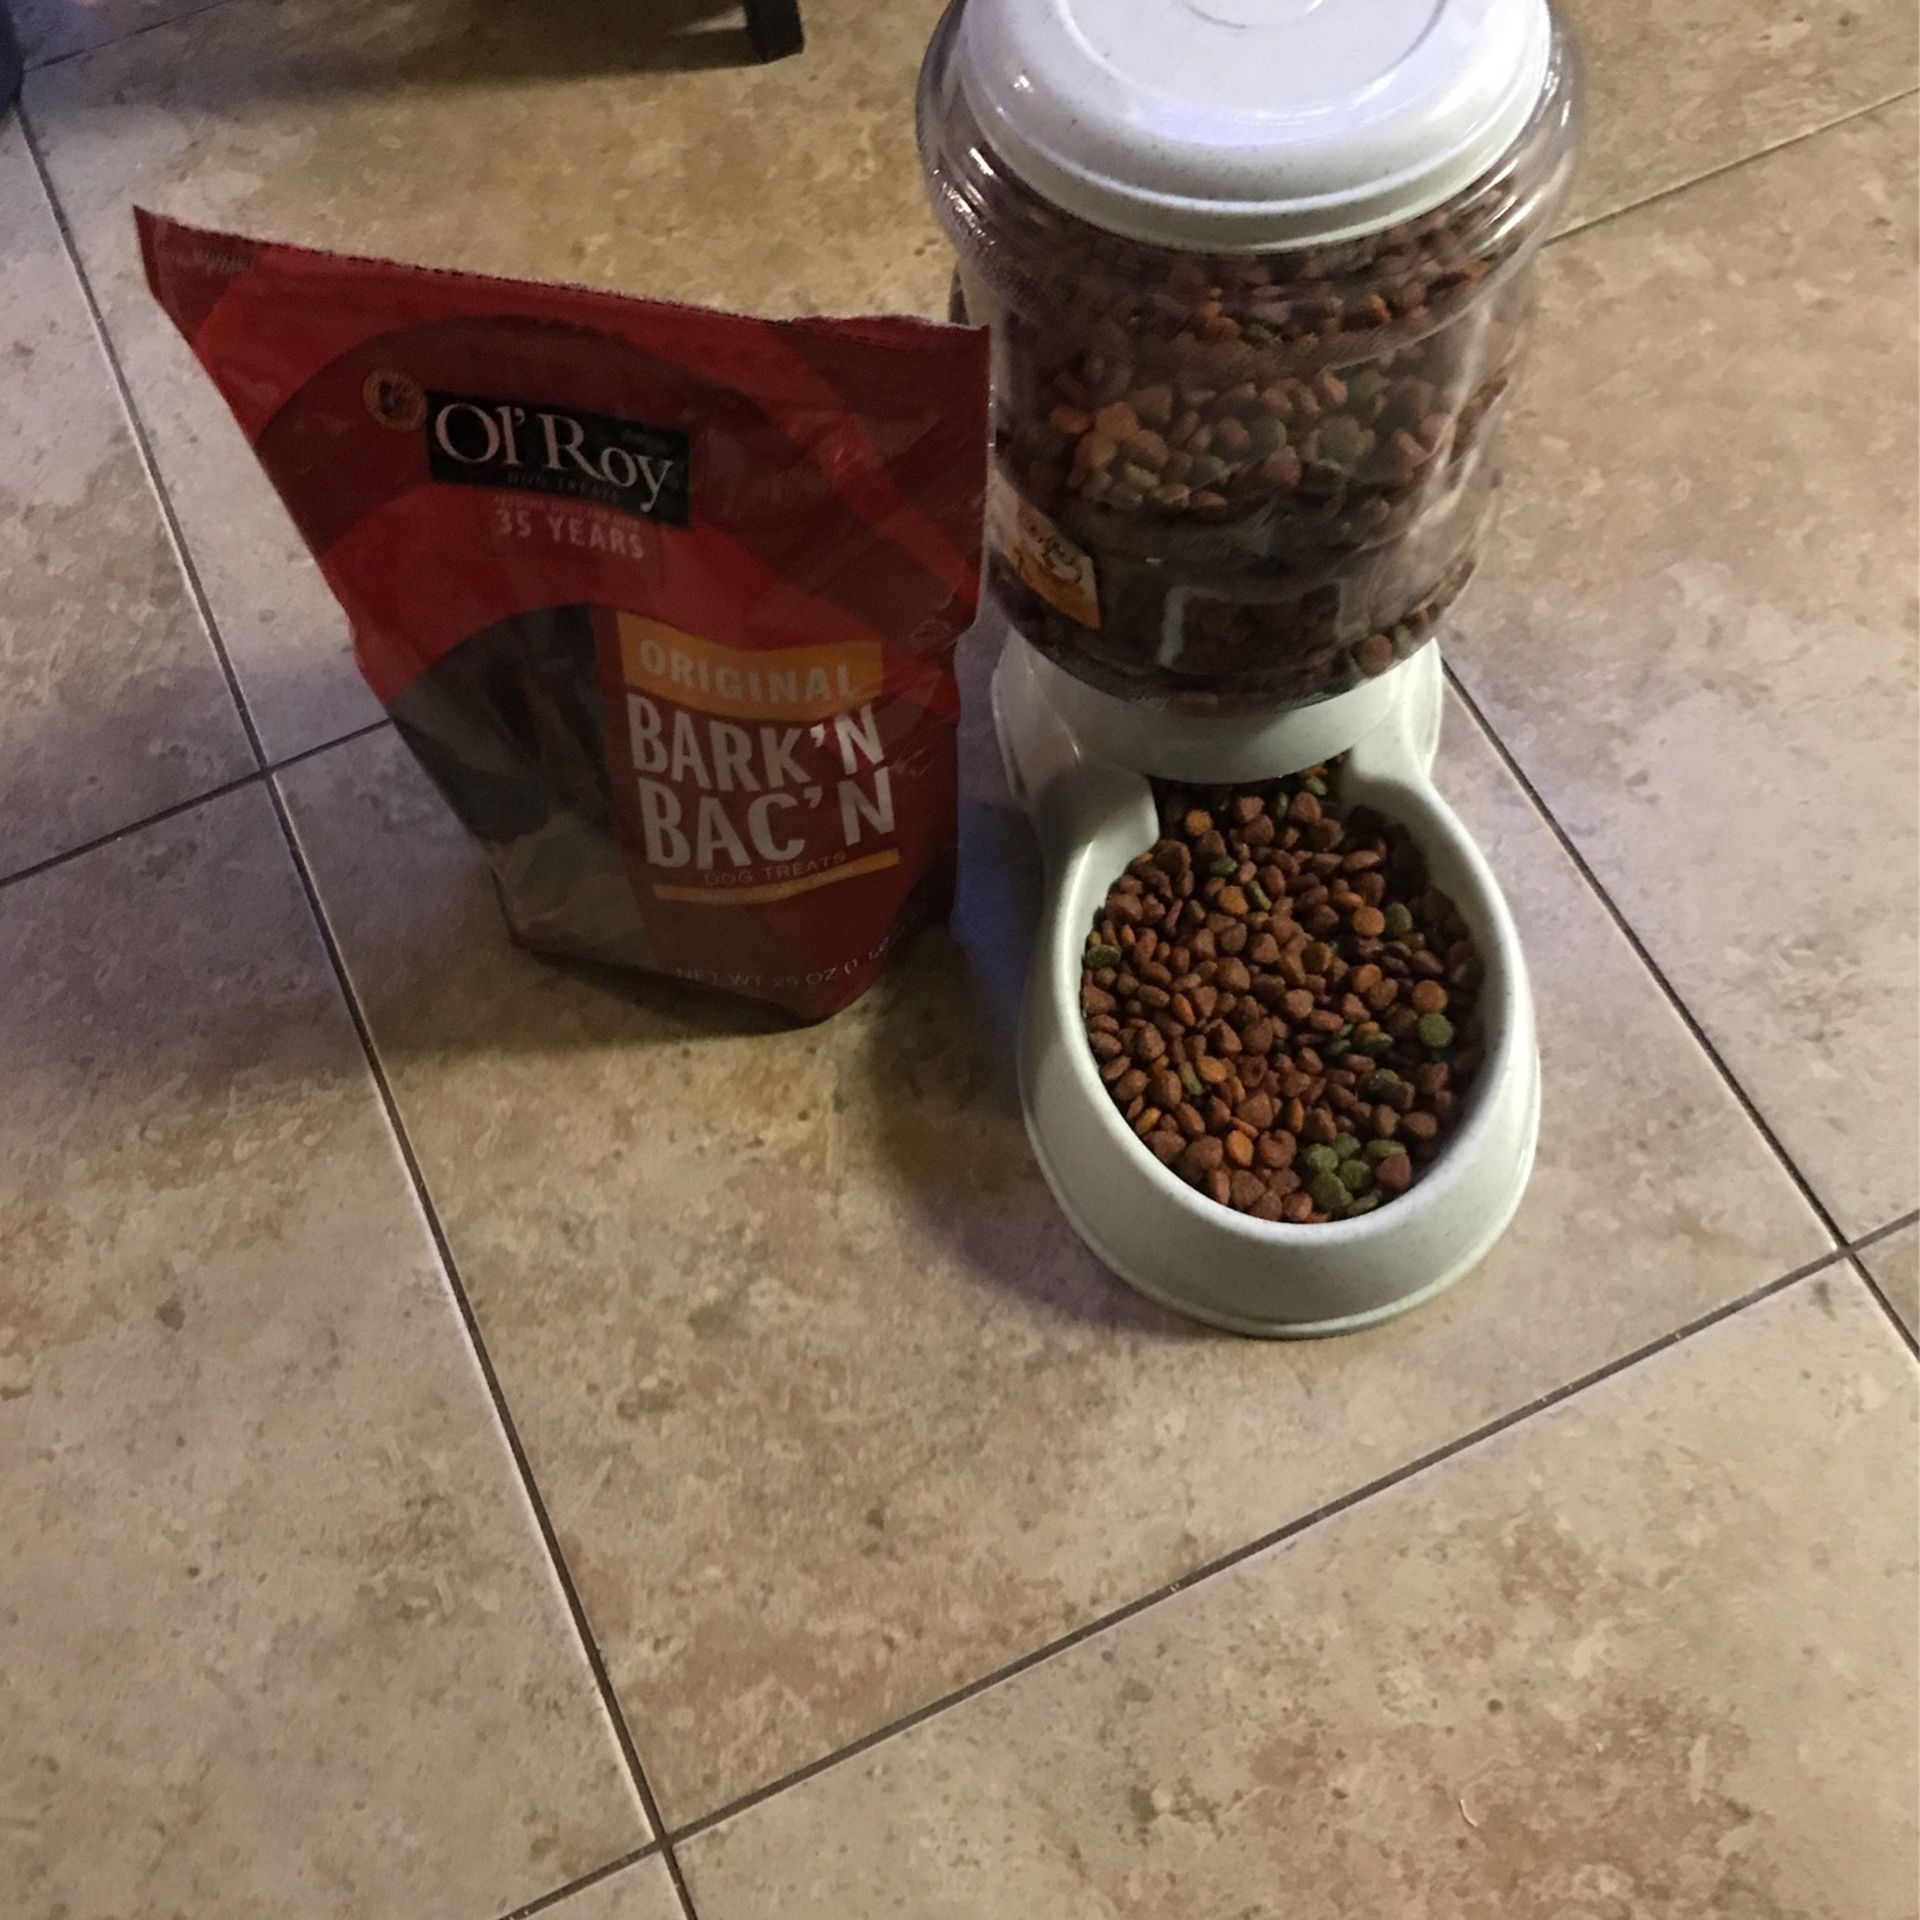 Free Fresh Puppy Food And New Bag Of Snacks